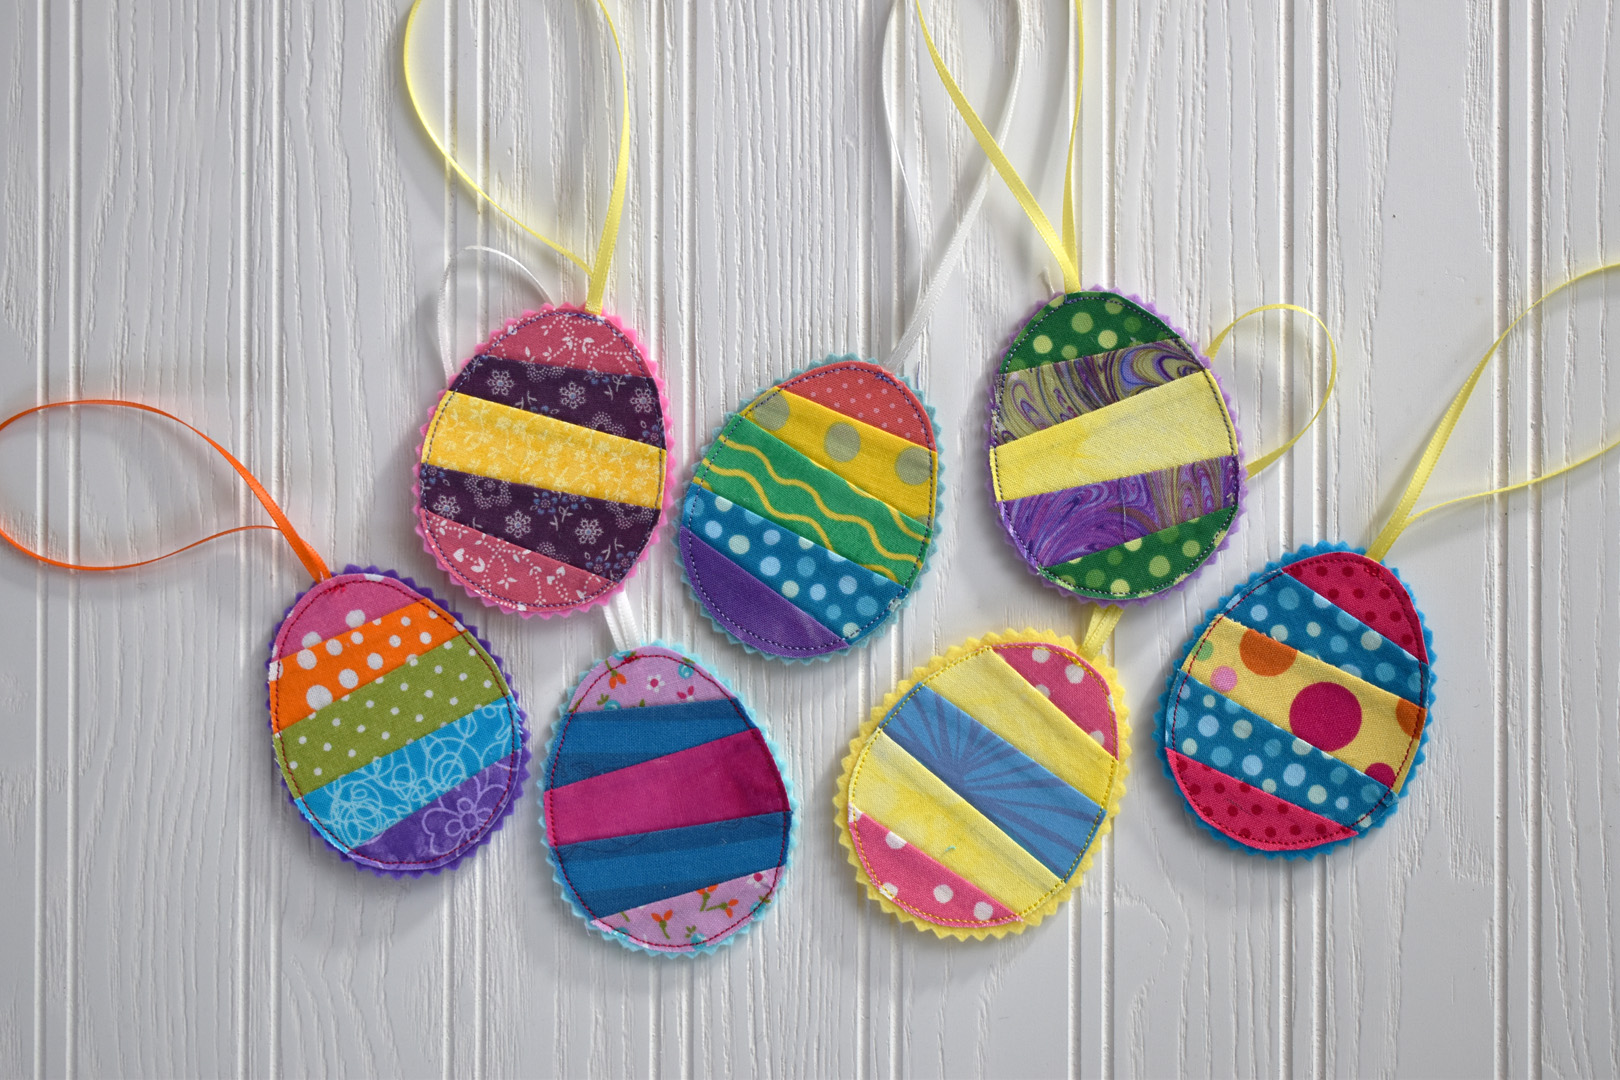 How to Sew Easter Ornaments - WeAllSew